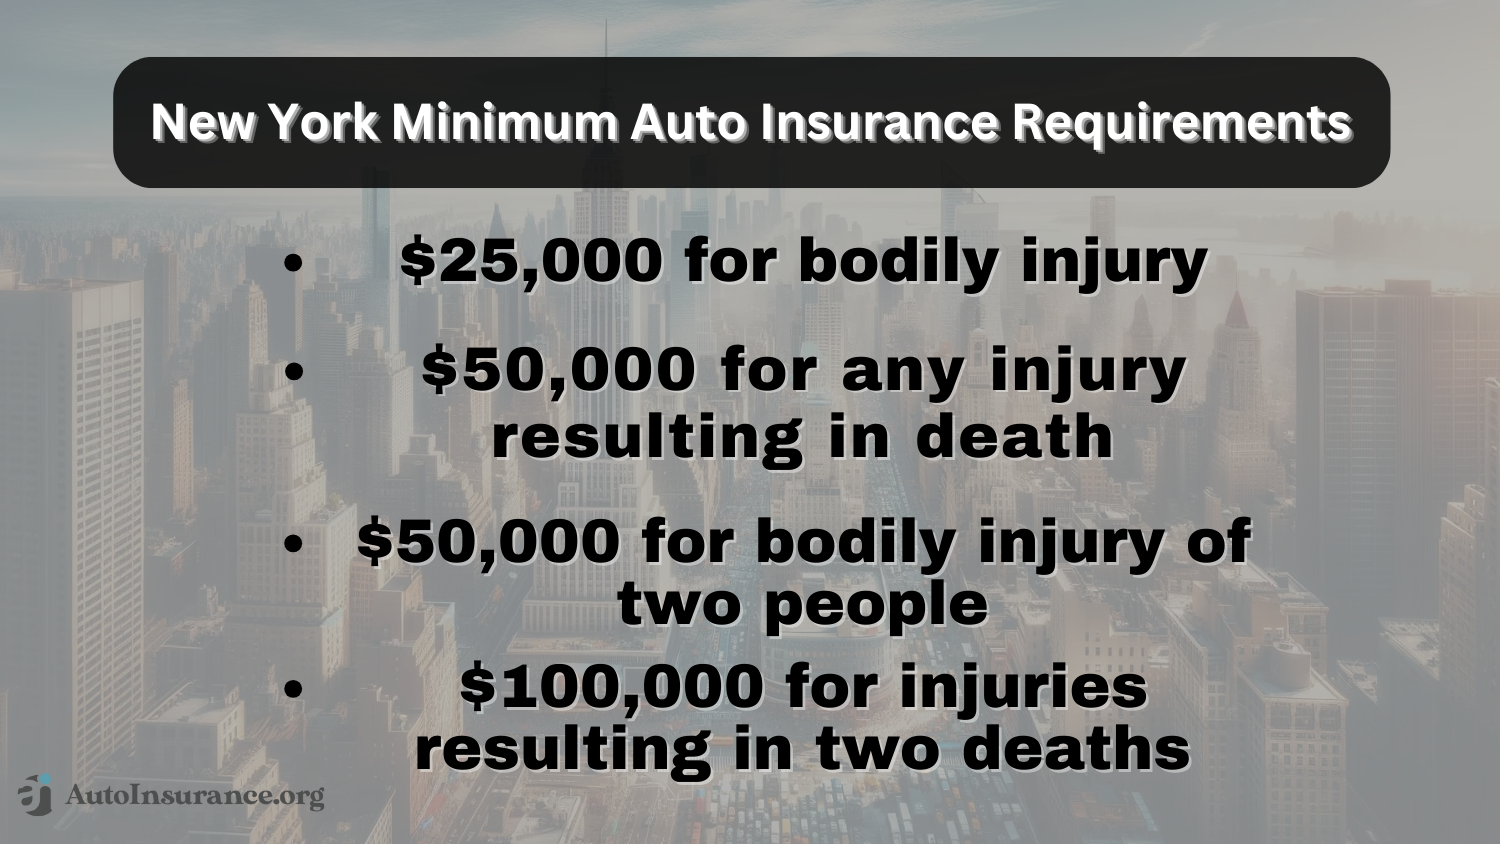 Tri-State Auto Insurance Review: New York Minimum Auto Insurance Requirements